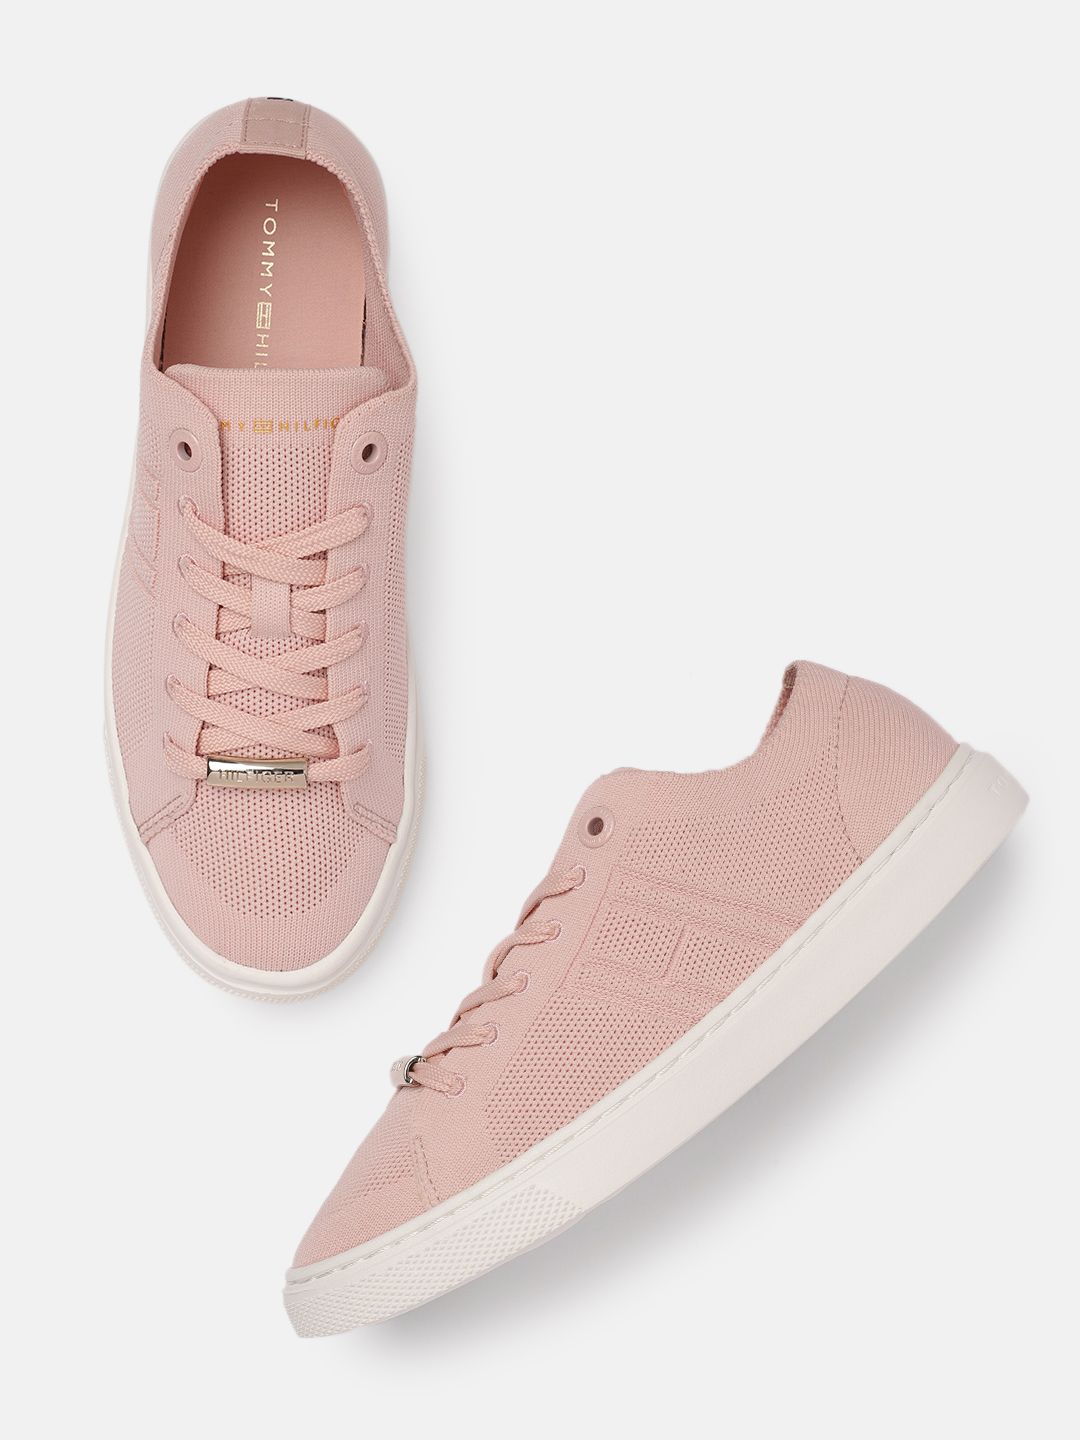 Tommy Hilfiger Women Peach Pink Textured Knitted Regular Sneakers Price in India